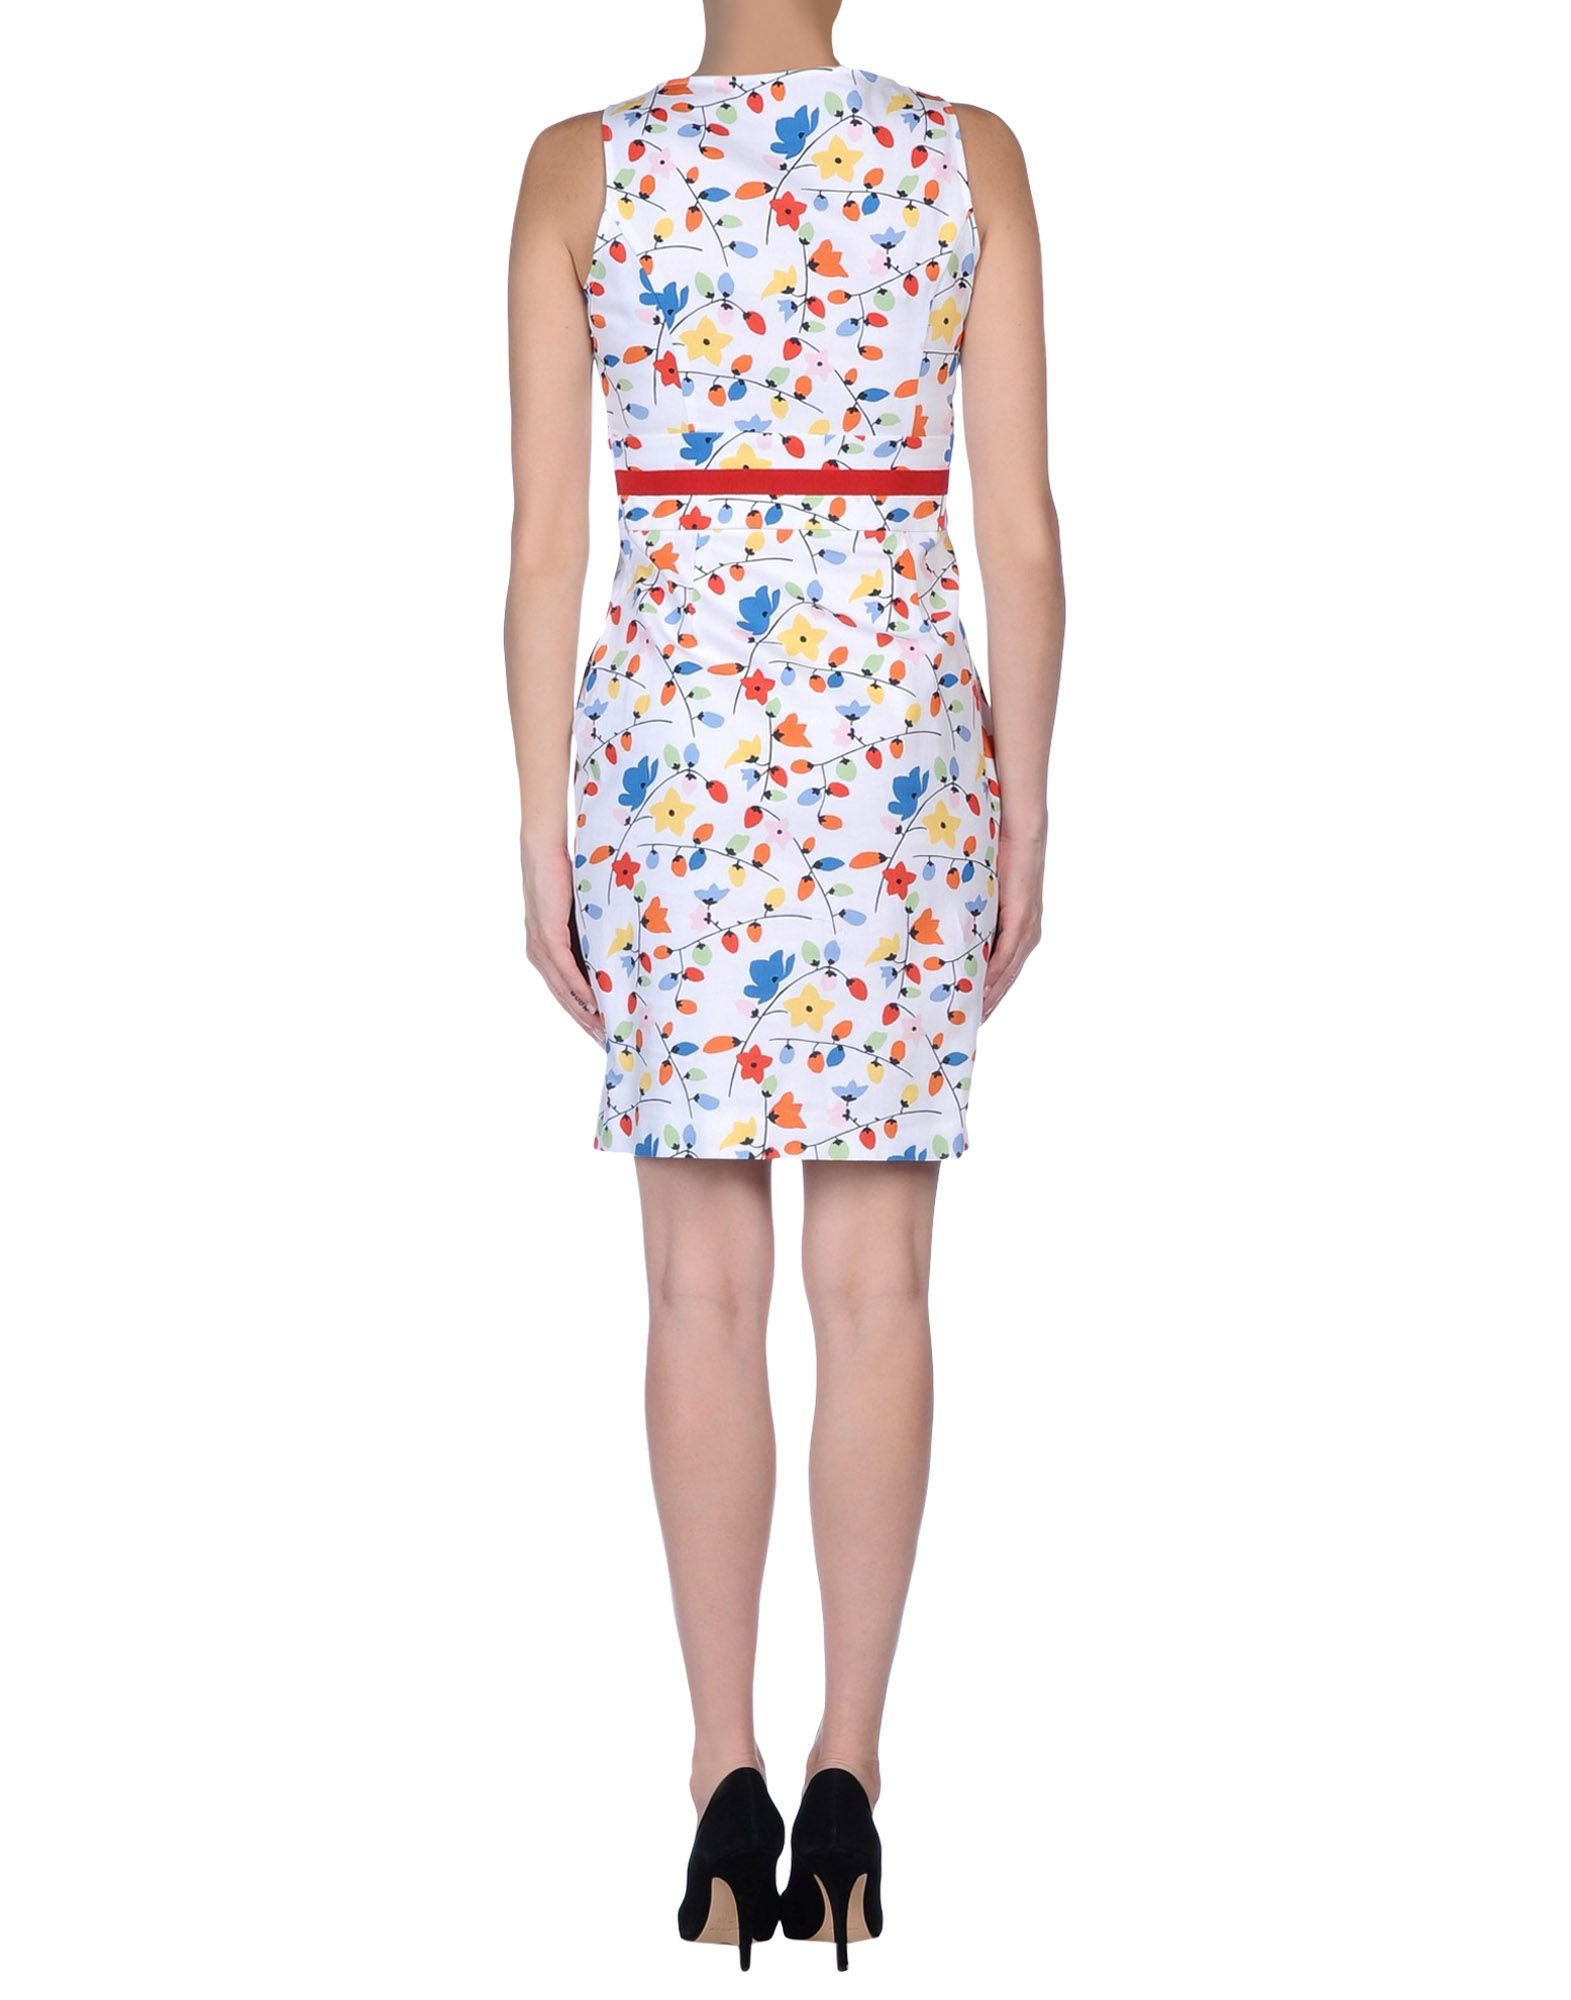 Lyst - Love moschino Floral Printed Dress in White